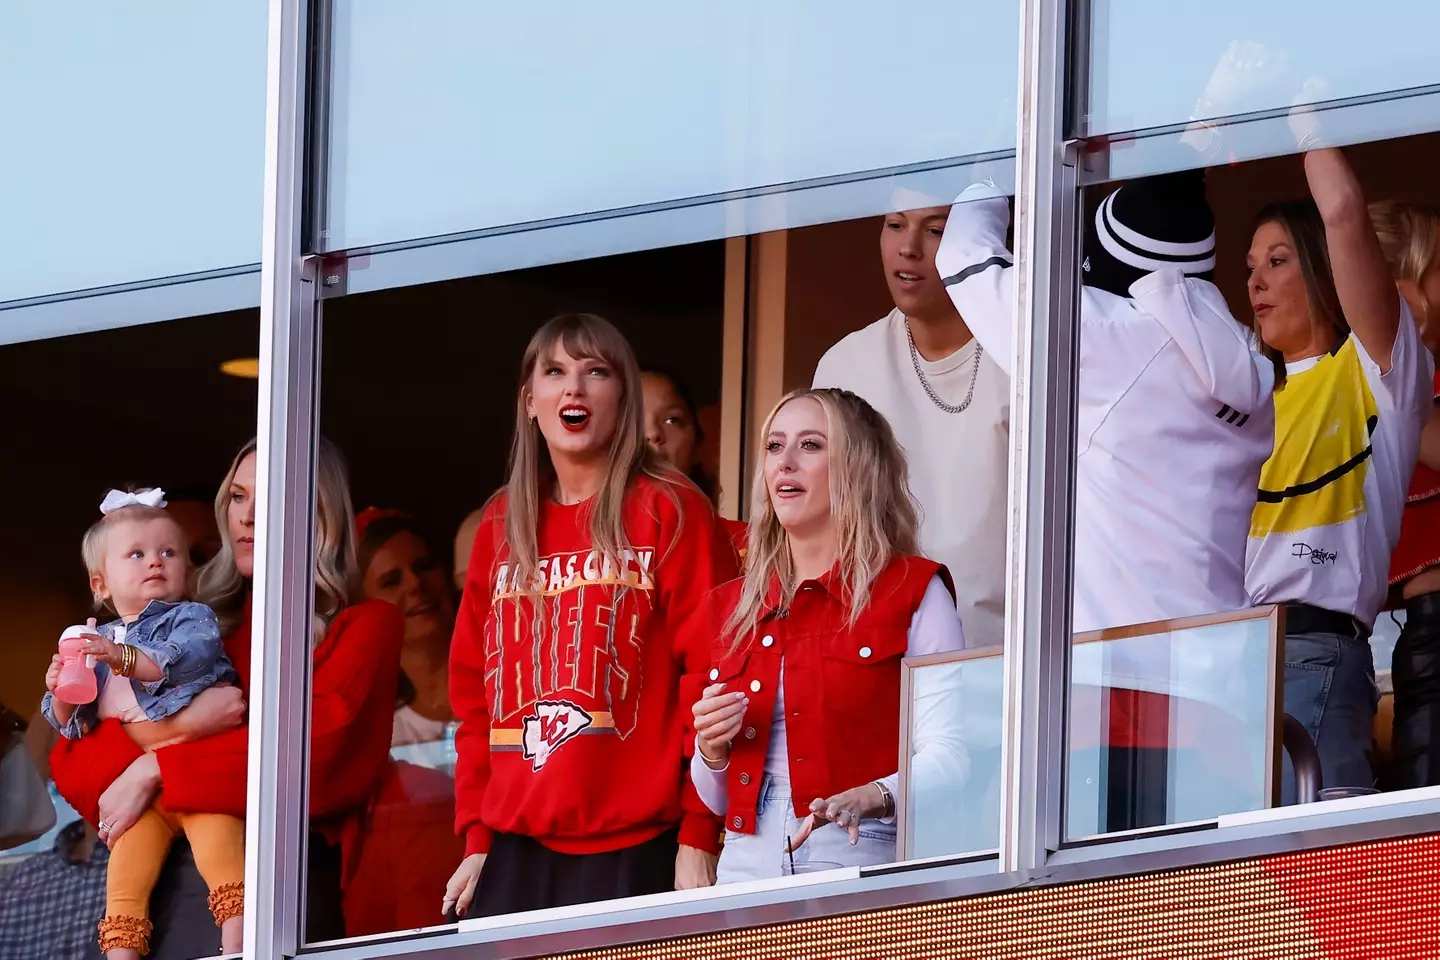 Taylor supporting Travis at last night's NFL game.